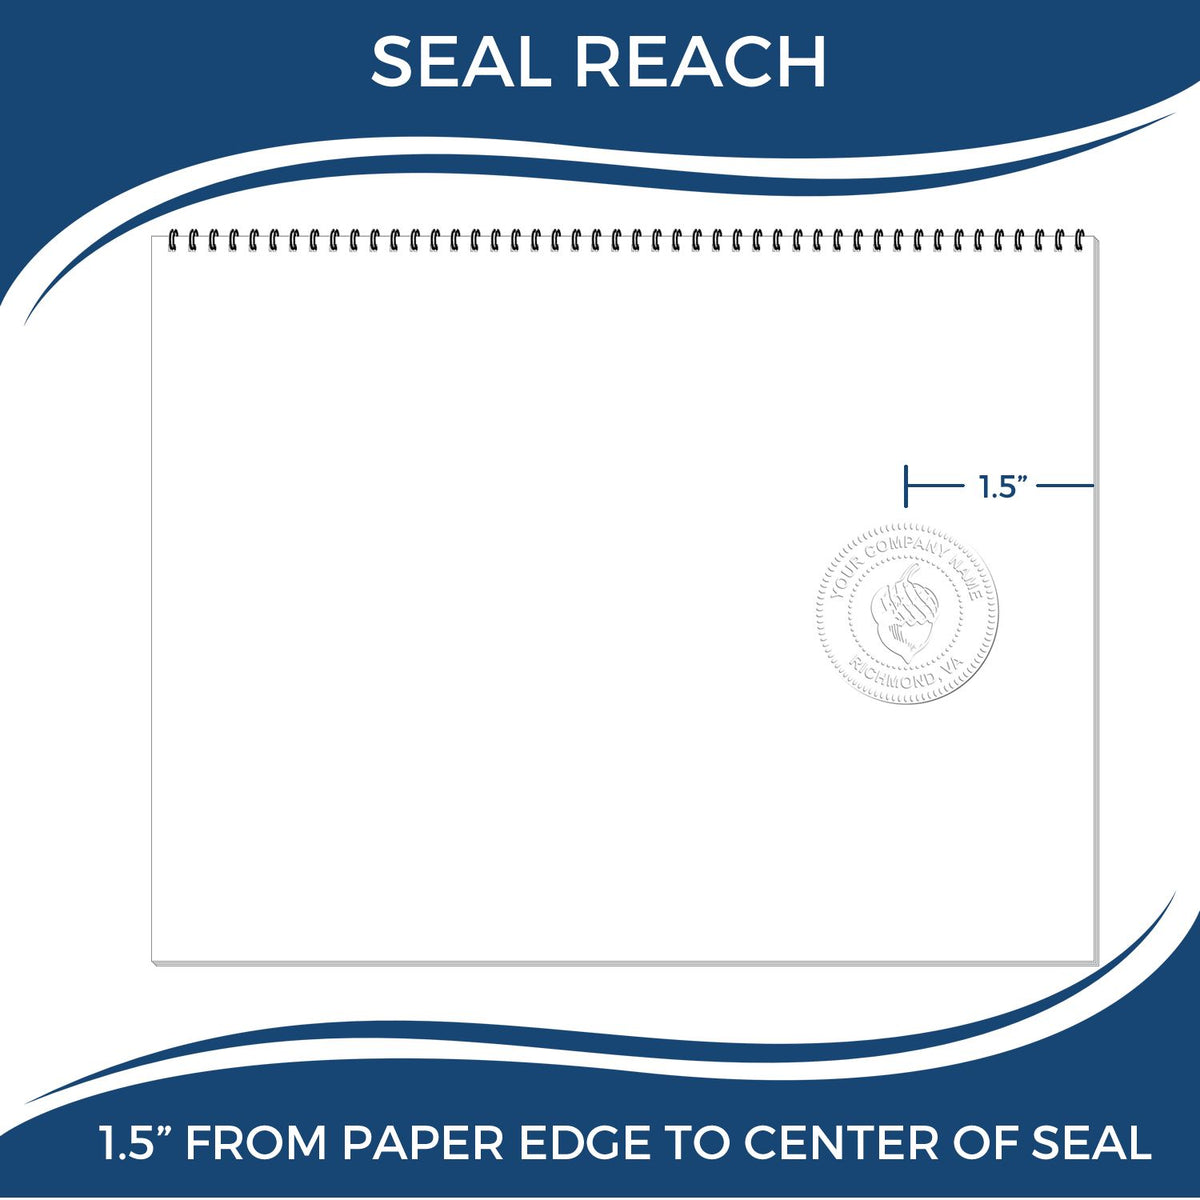 An infographic showing the seal reach which is represented by a ruler and a miniature seal image of the State of South Carolina Soft Land Surveyor Embossing Seal